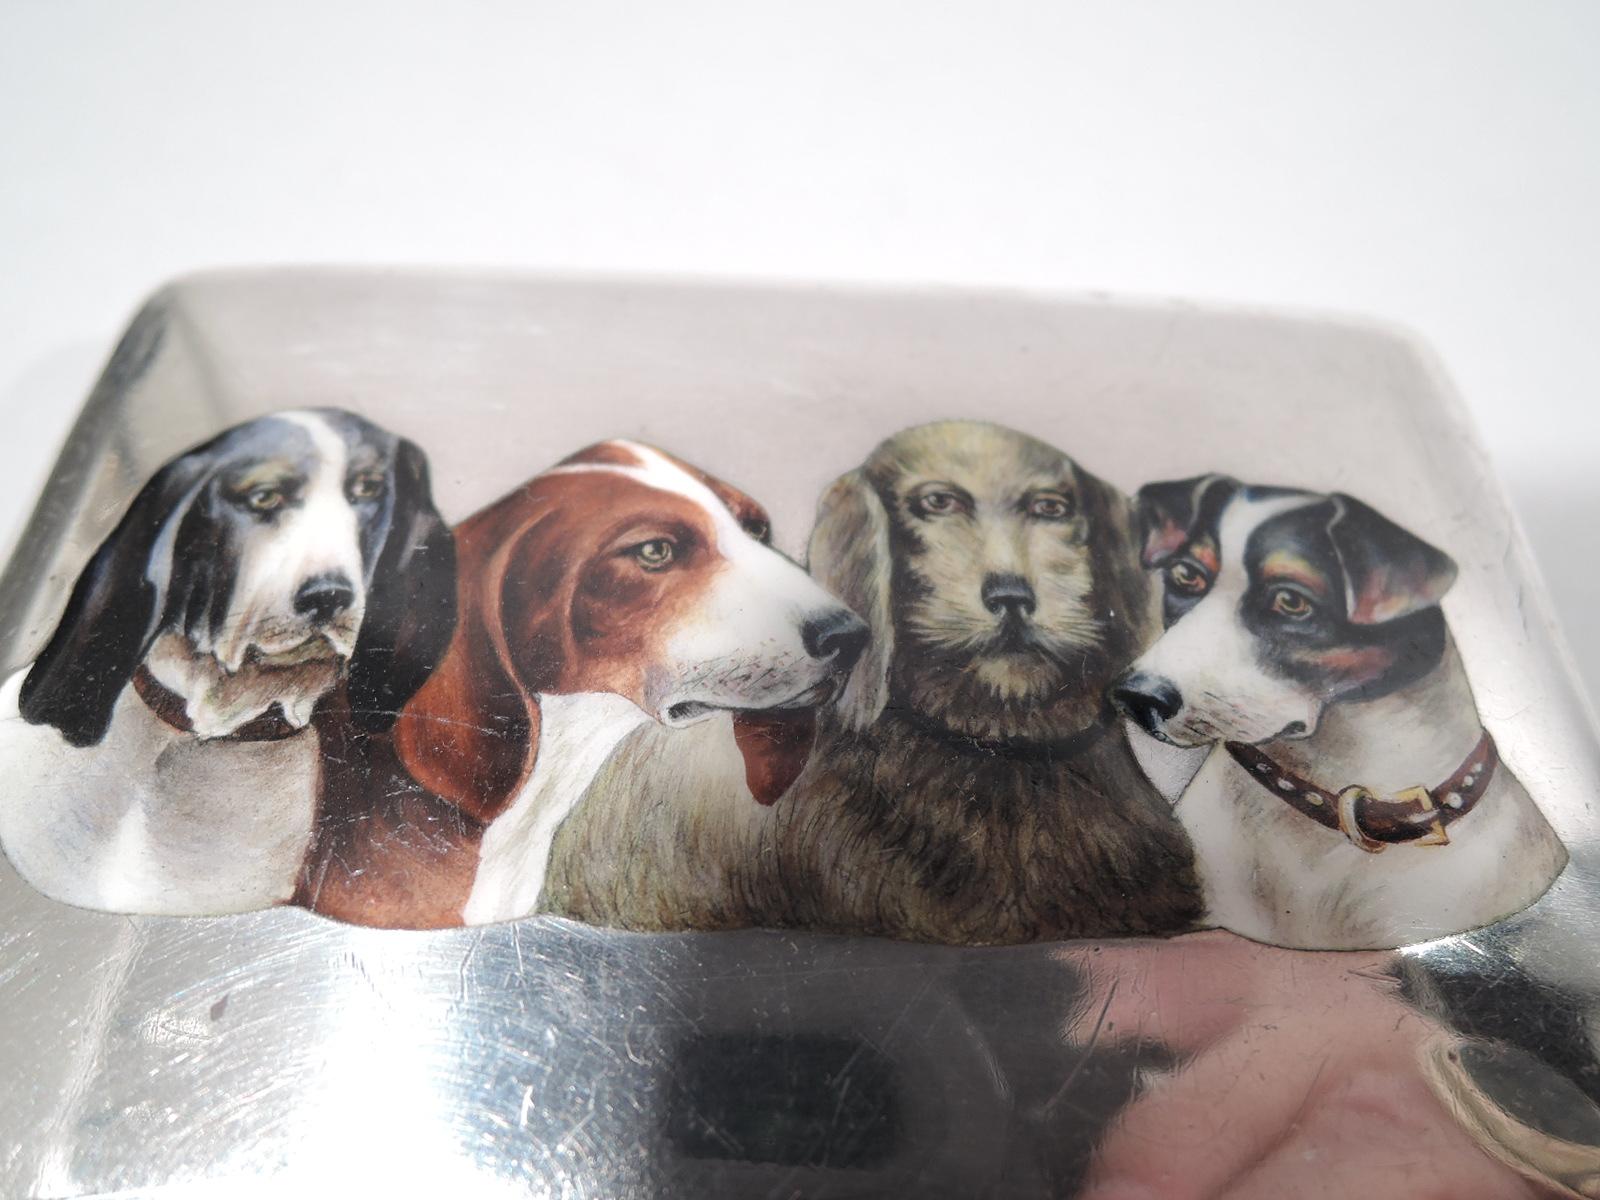 German 800 silver and enamel case, ca 1910. Rectangular and hinged. On cover are enameled 4 hound heads—all floppy ears, saggy jowls, wet noses, and whiskers. A keen-eyed canine group. Interior gilt. German marks. Gross weight: 3.8 troy ounces.